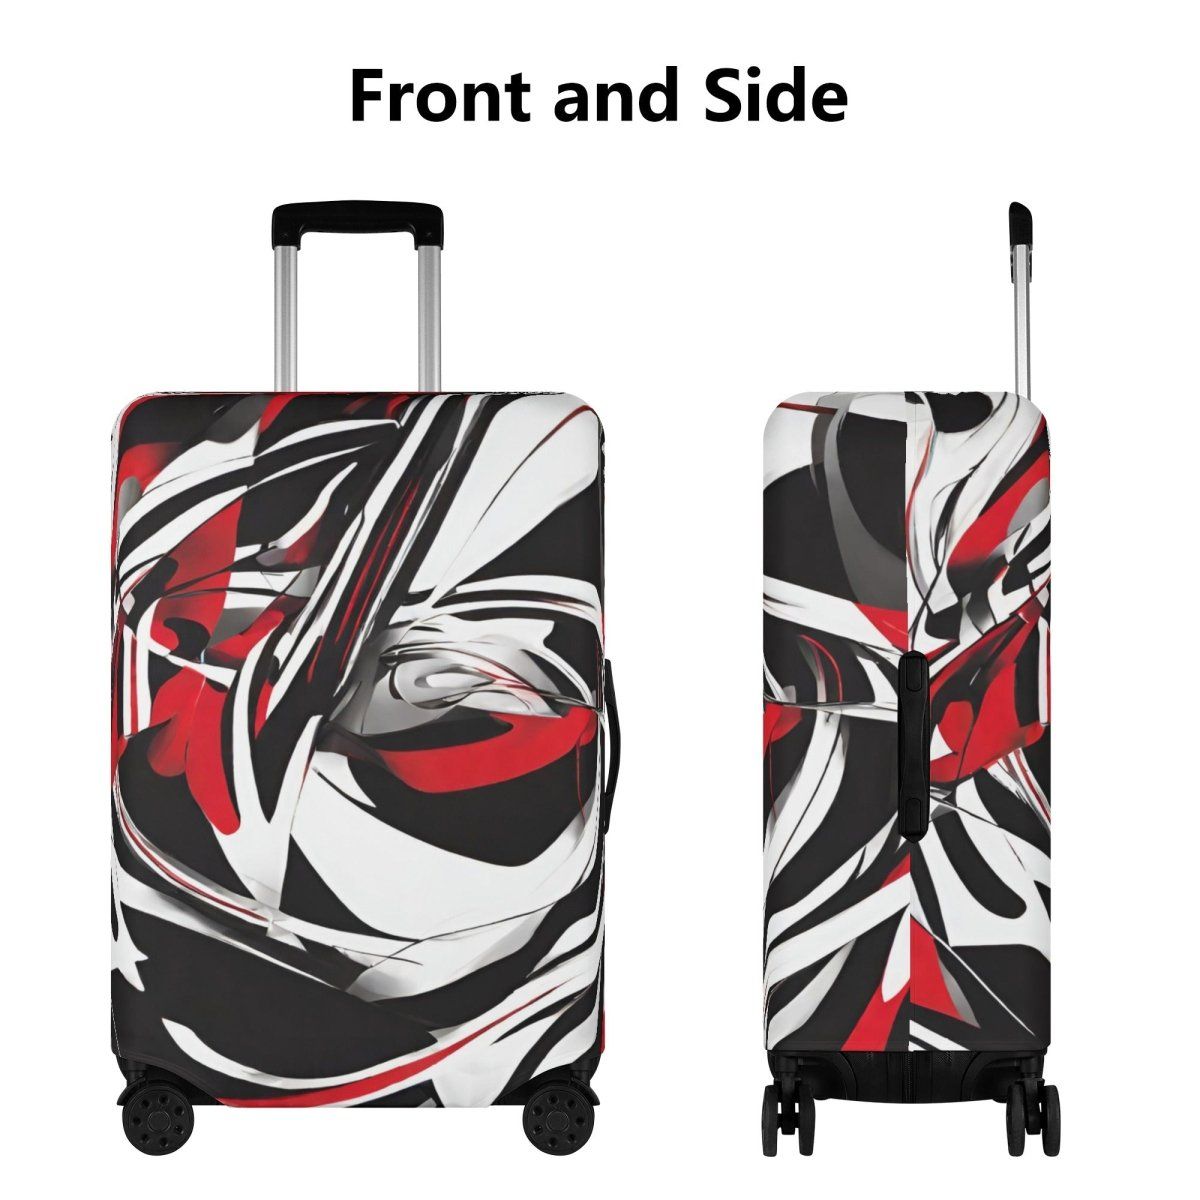 Travel in Style with our Red White and Black Protective Luggage Cover  Avoid Mix-Ups - Iron Phoenix GHG